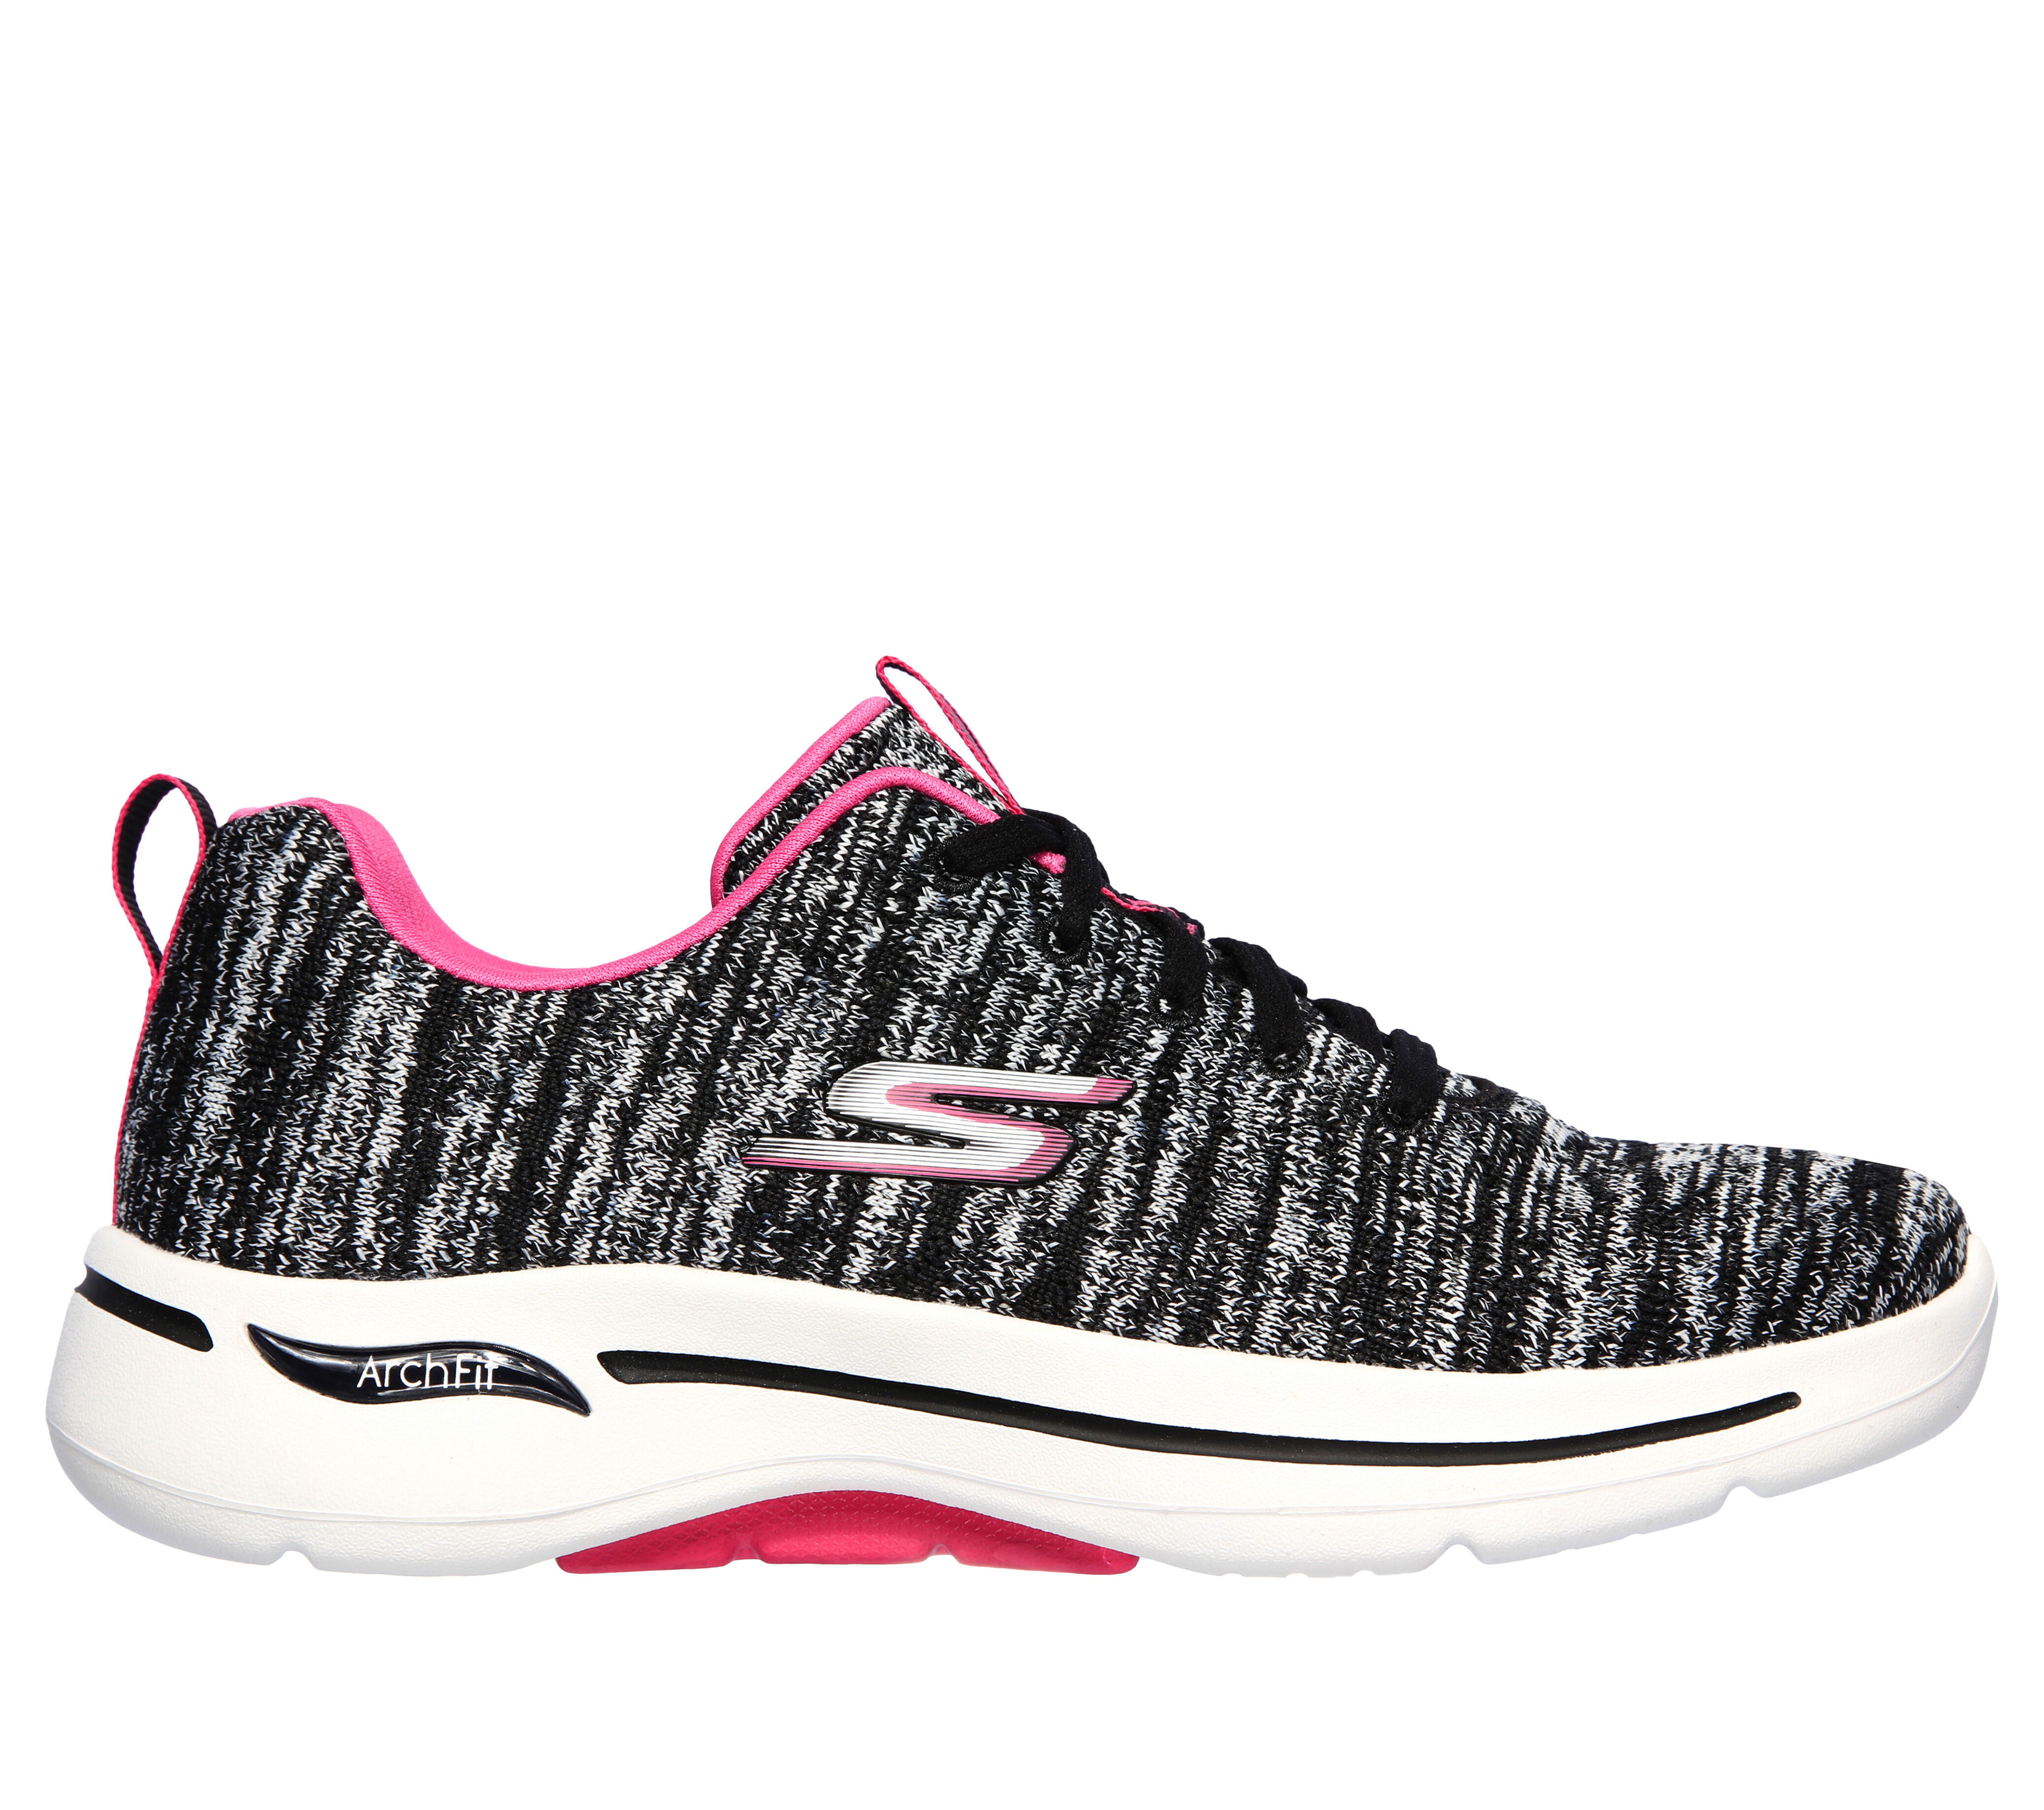 photo of skechers shoes